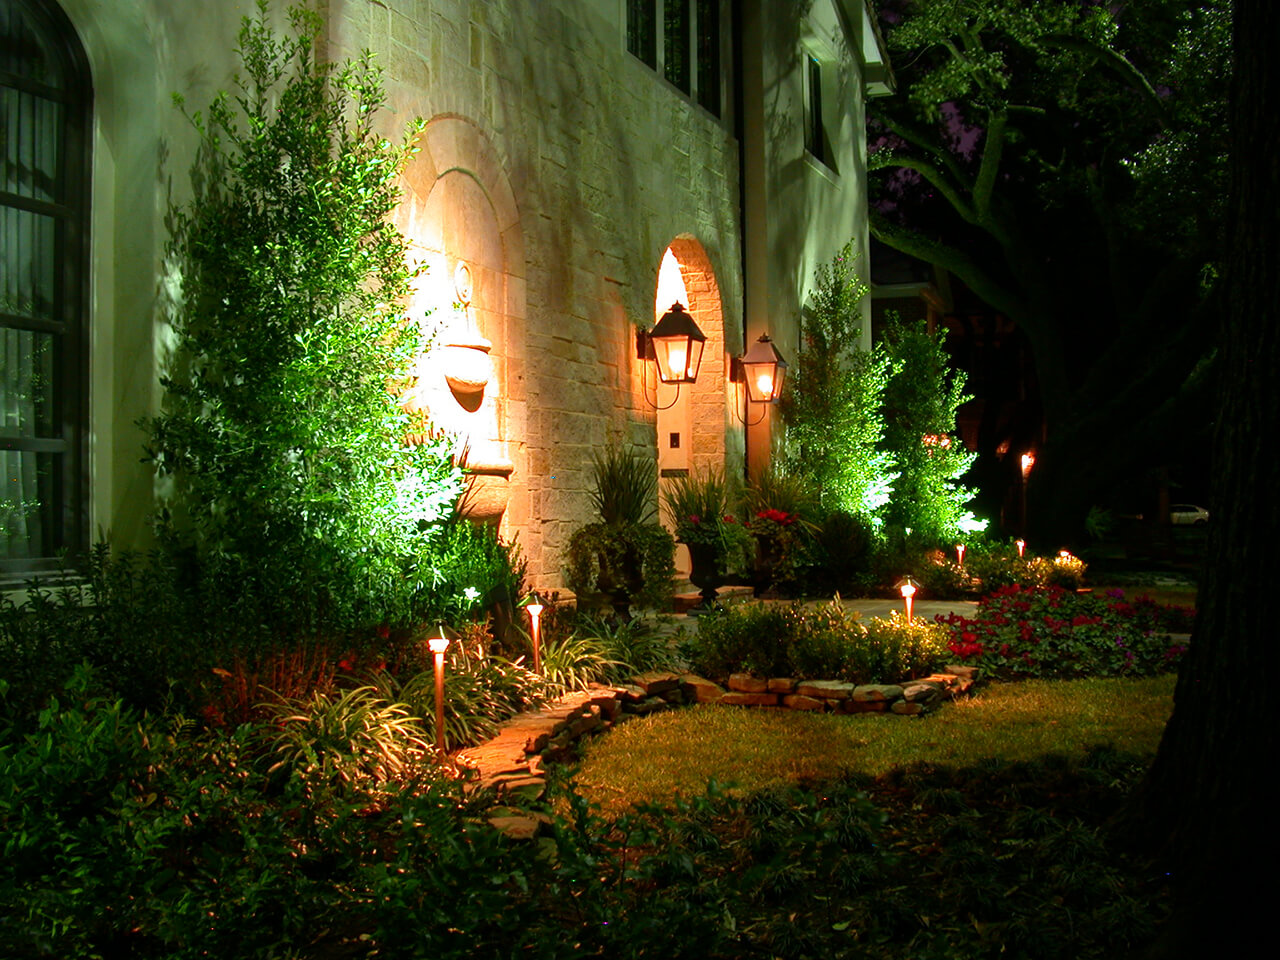 Natural Concepts light fixtures lighting the fountain, trees, and flower beds in the front of a stone house